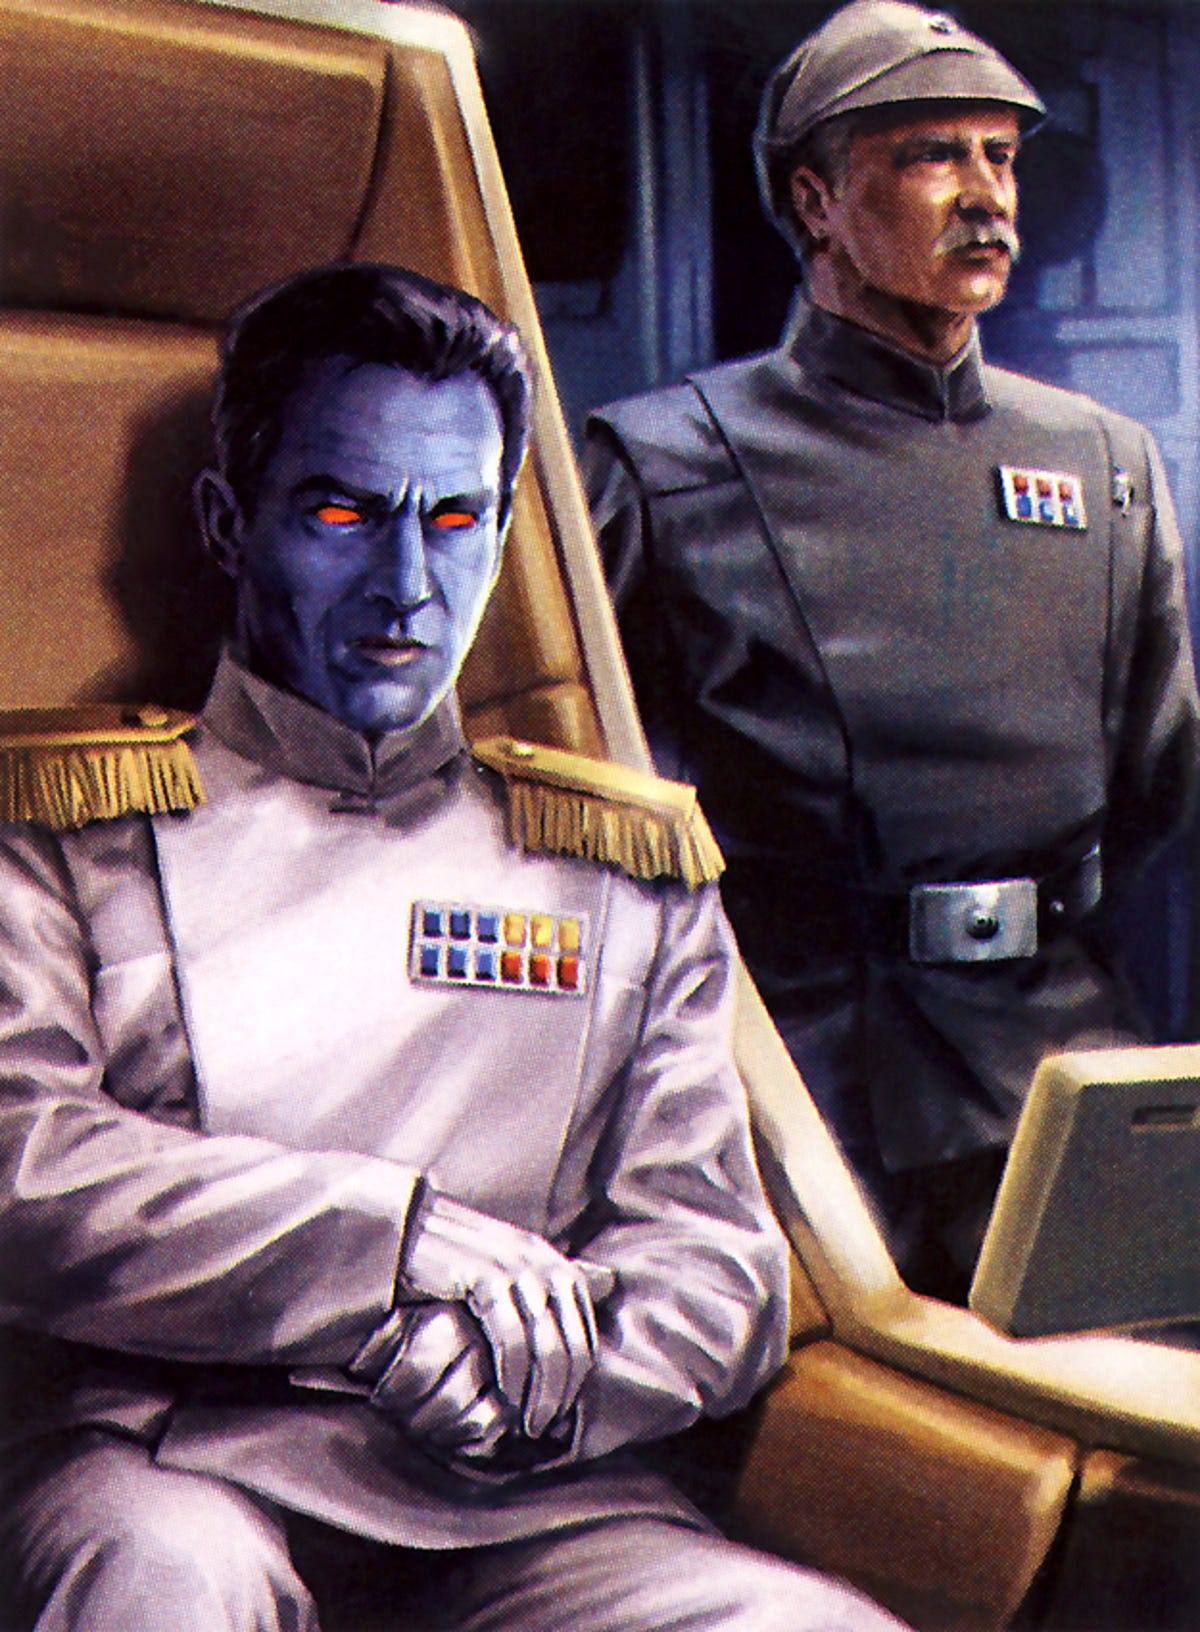 The blue-skinned Grand Admiral Thrawn is cunning, calculating, and would be a perfect role for Benedict Cumberbatch if a movie were ever to be made.